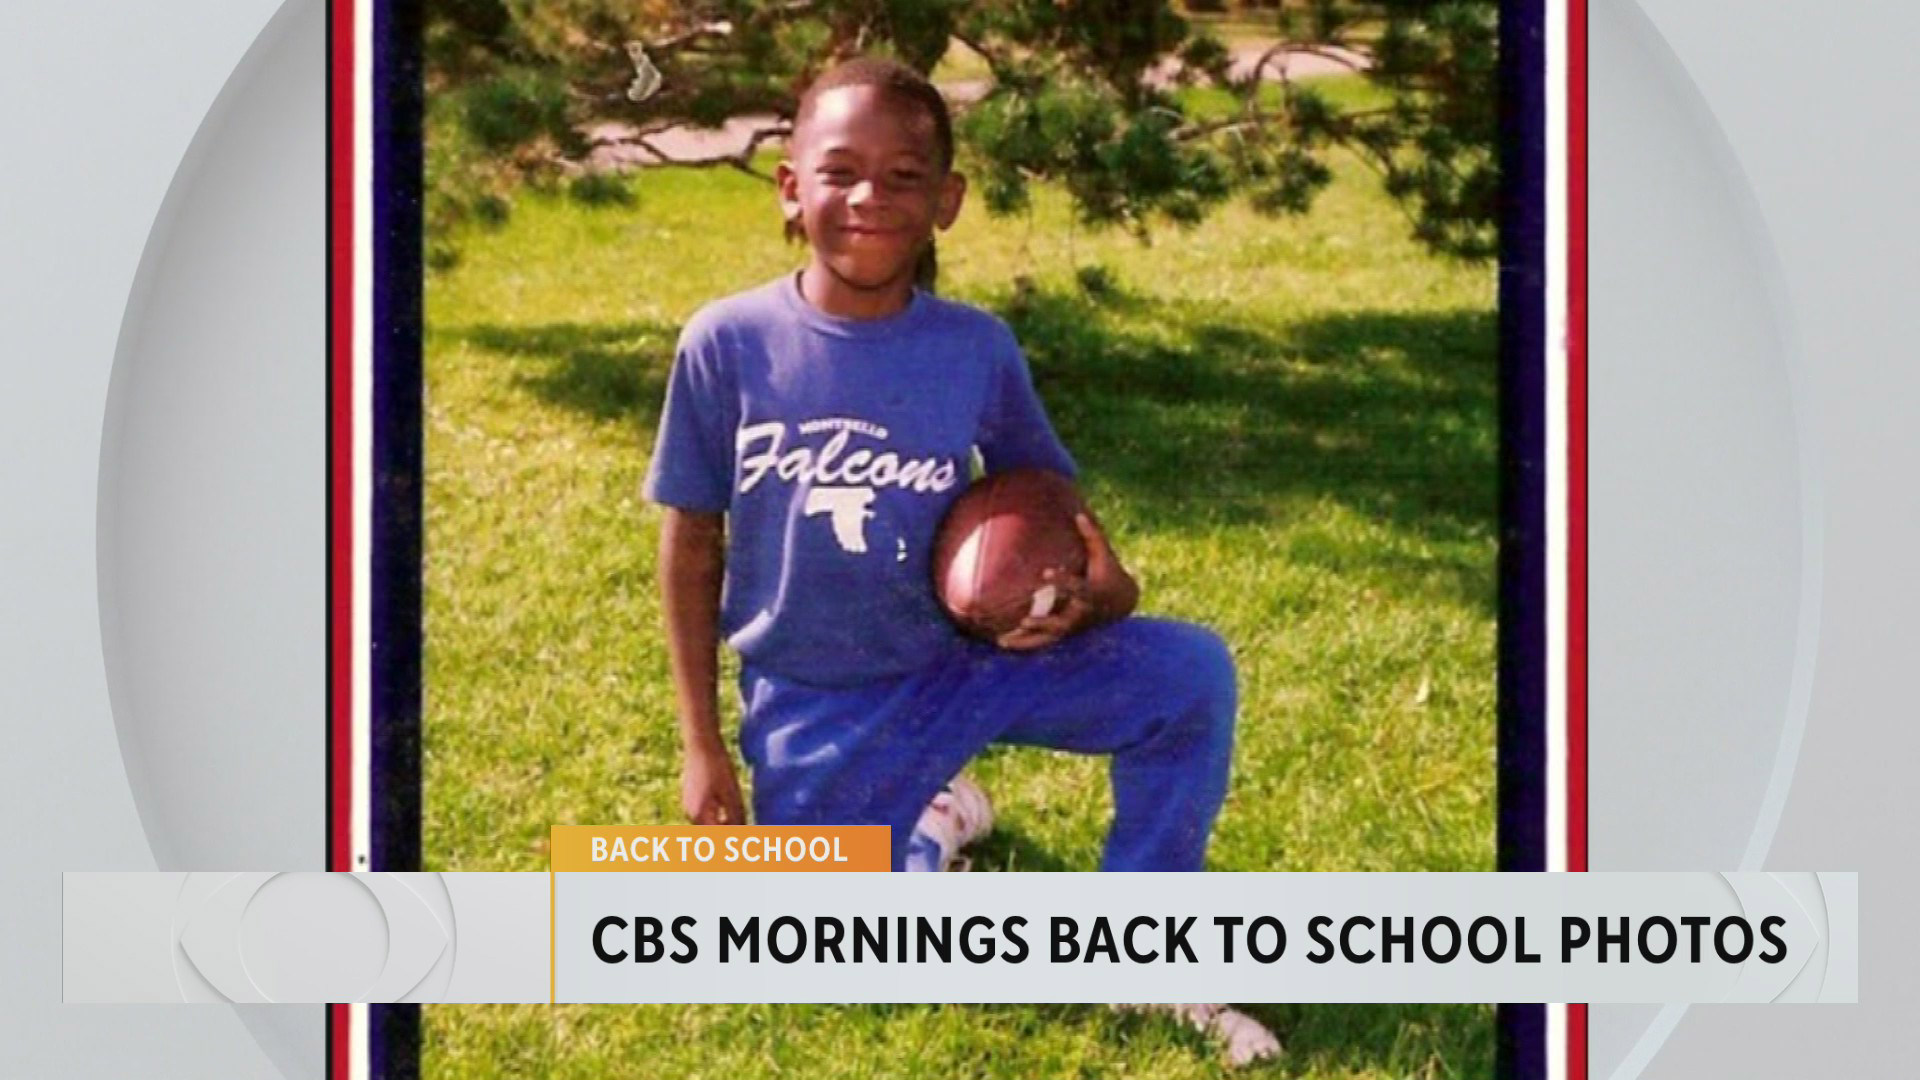 Cbs Colorado Mornings Newscasters Show School Pics From The Past